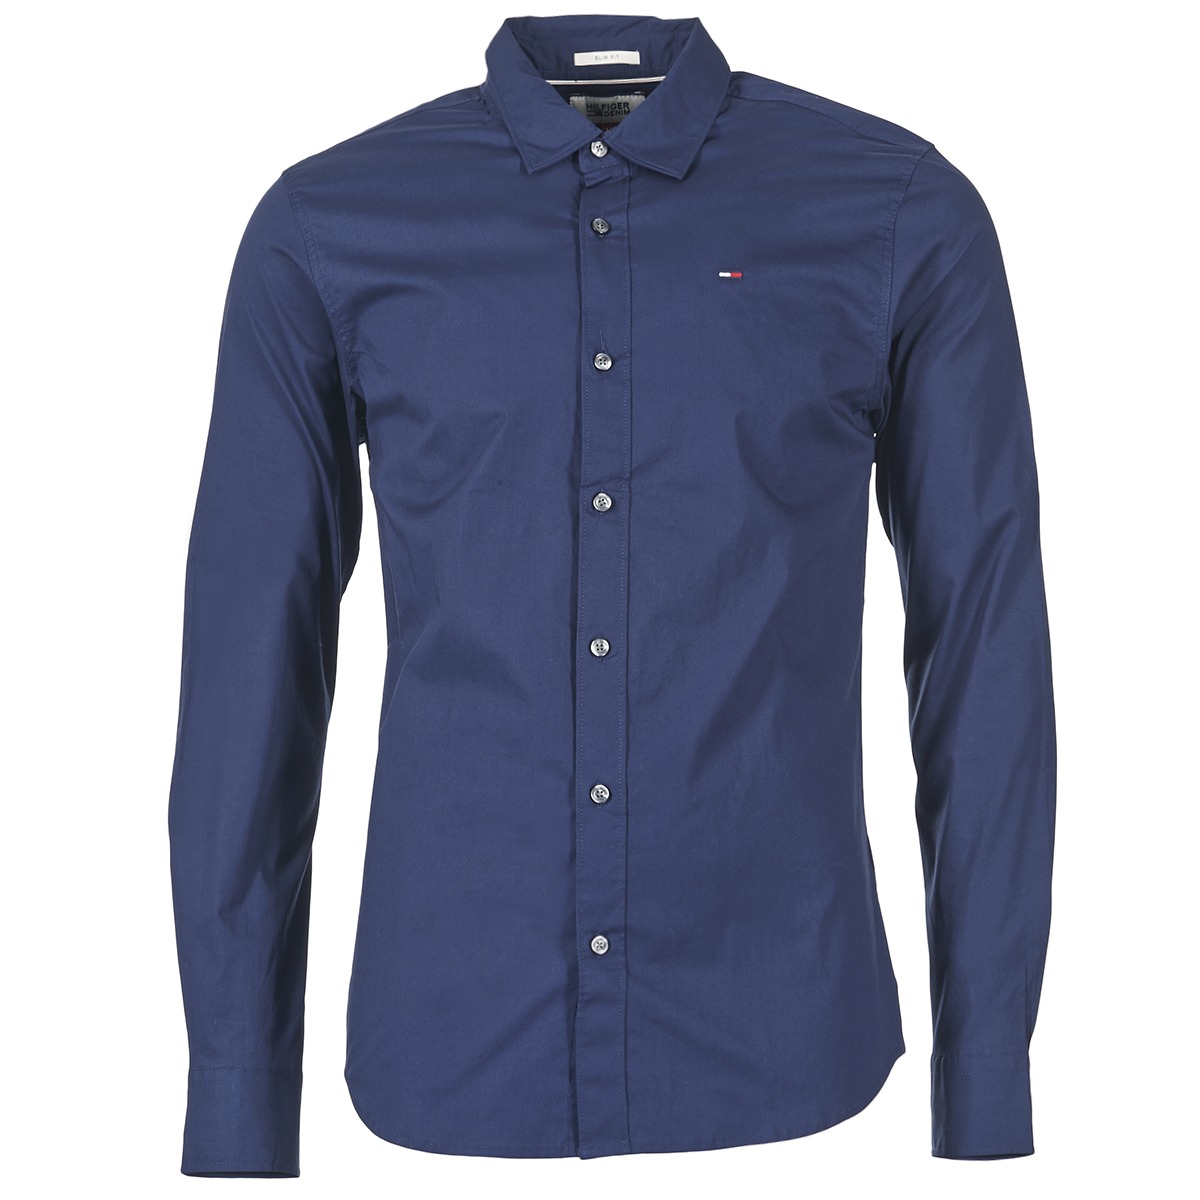 Tommy Jeans Europe delivery Marine - shirts Spartoo ! 77,00 STRETCH Fast Men ORIGINAL TJM SHIRT Clothing - long-sleeved € 